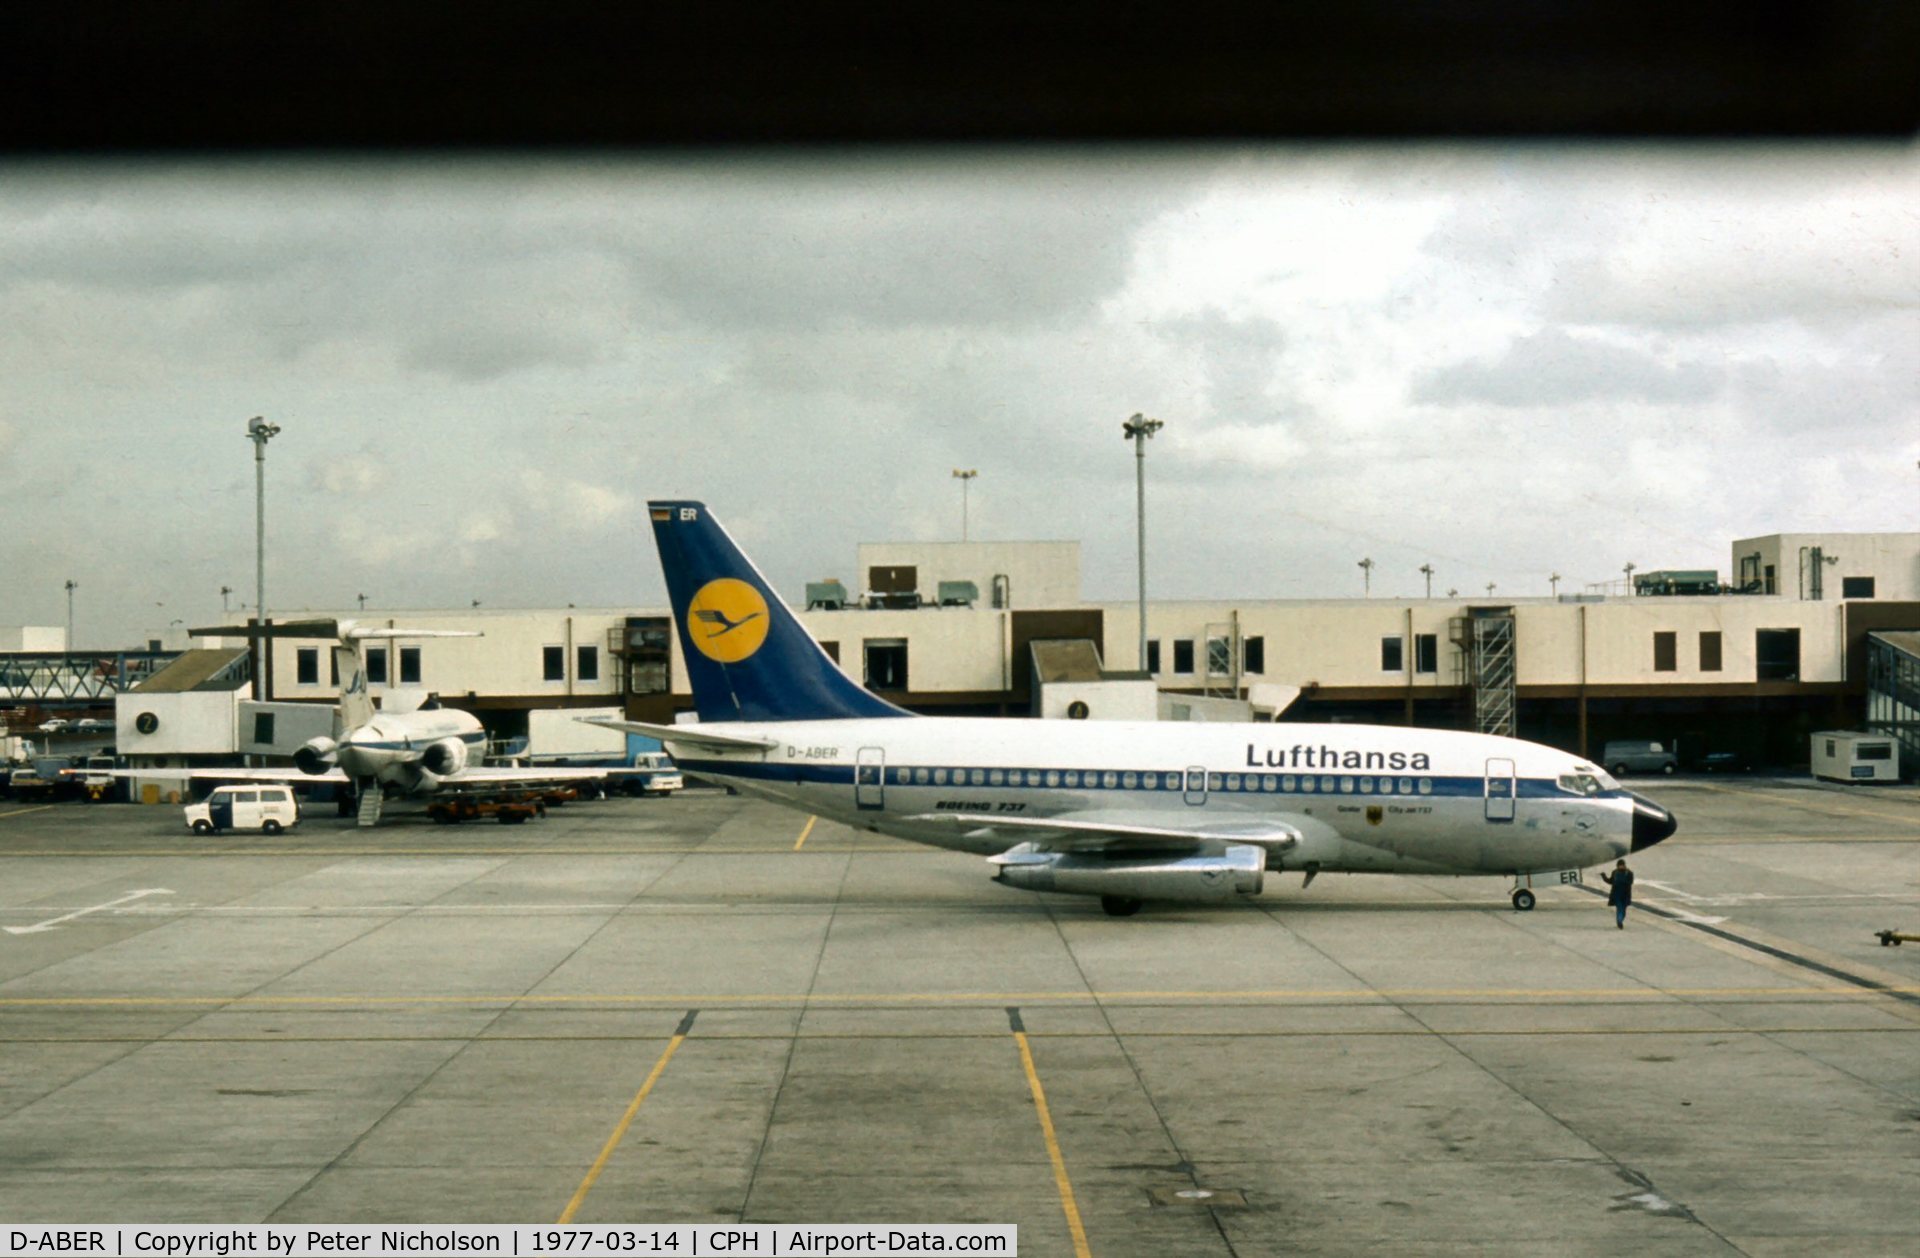 D-ABER, 1968 Boeing 737-130 C/N 19028, This Boeing 737, named Goslar, of Lufthansa was seen at Kastrup in the Spring of 1977. The same regn was later allocated to a later model 737.